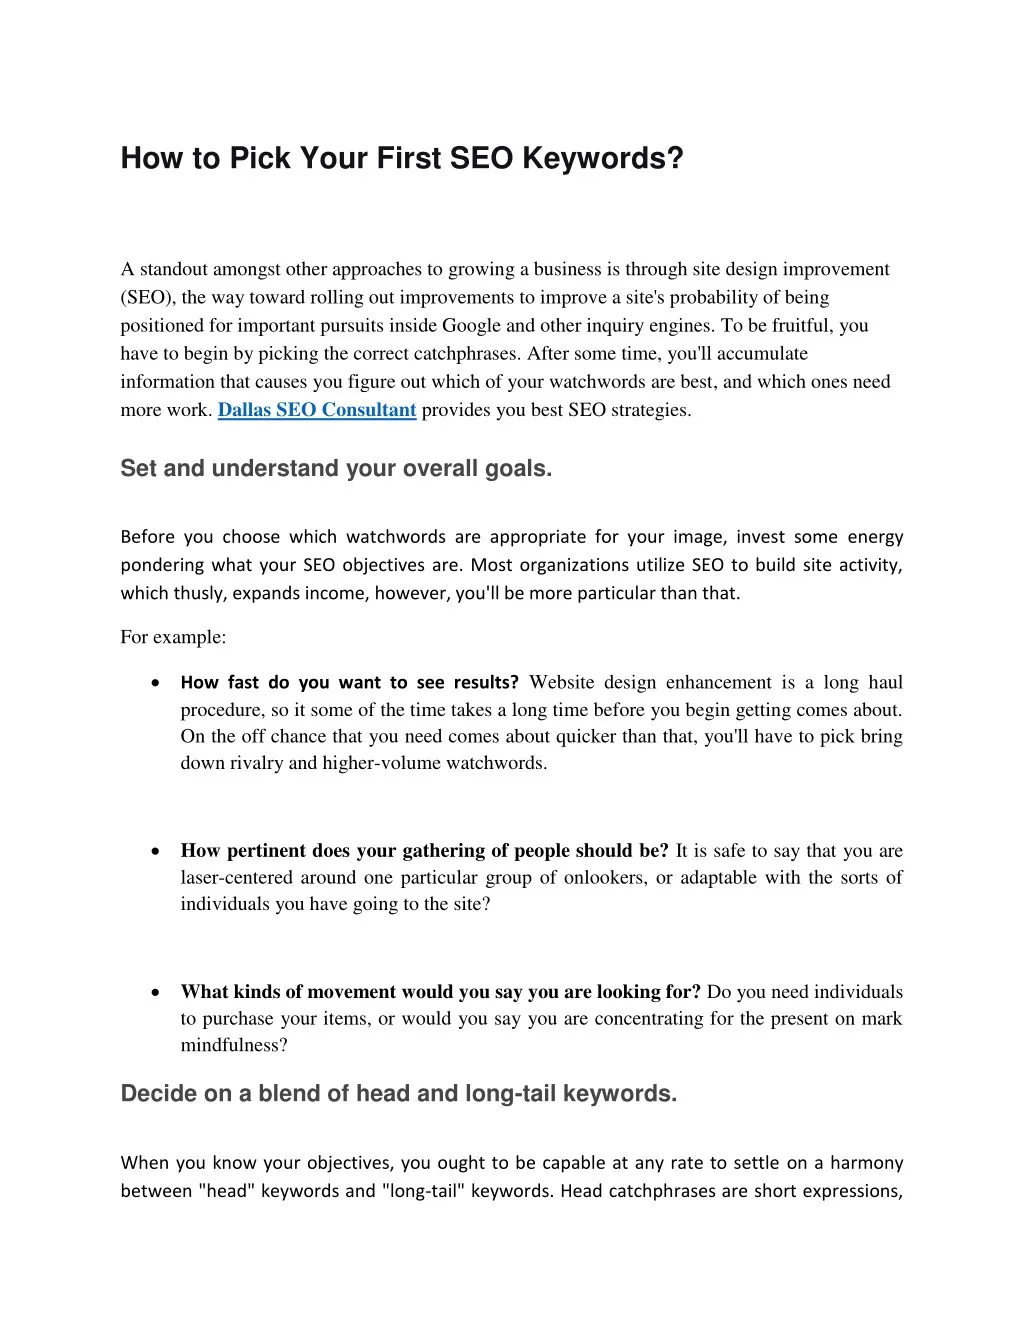 how to pick your first seo keywords